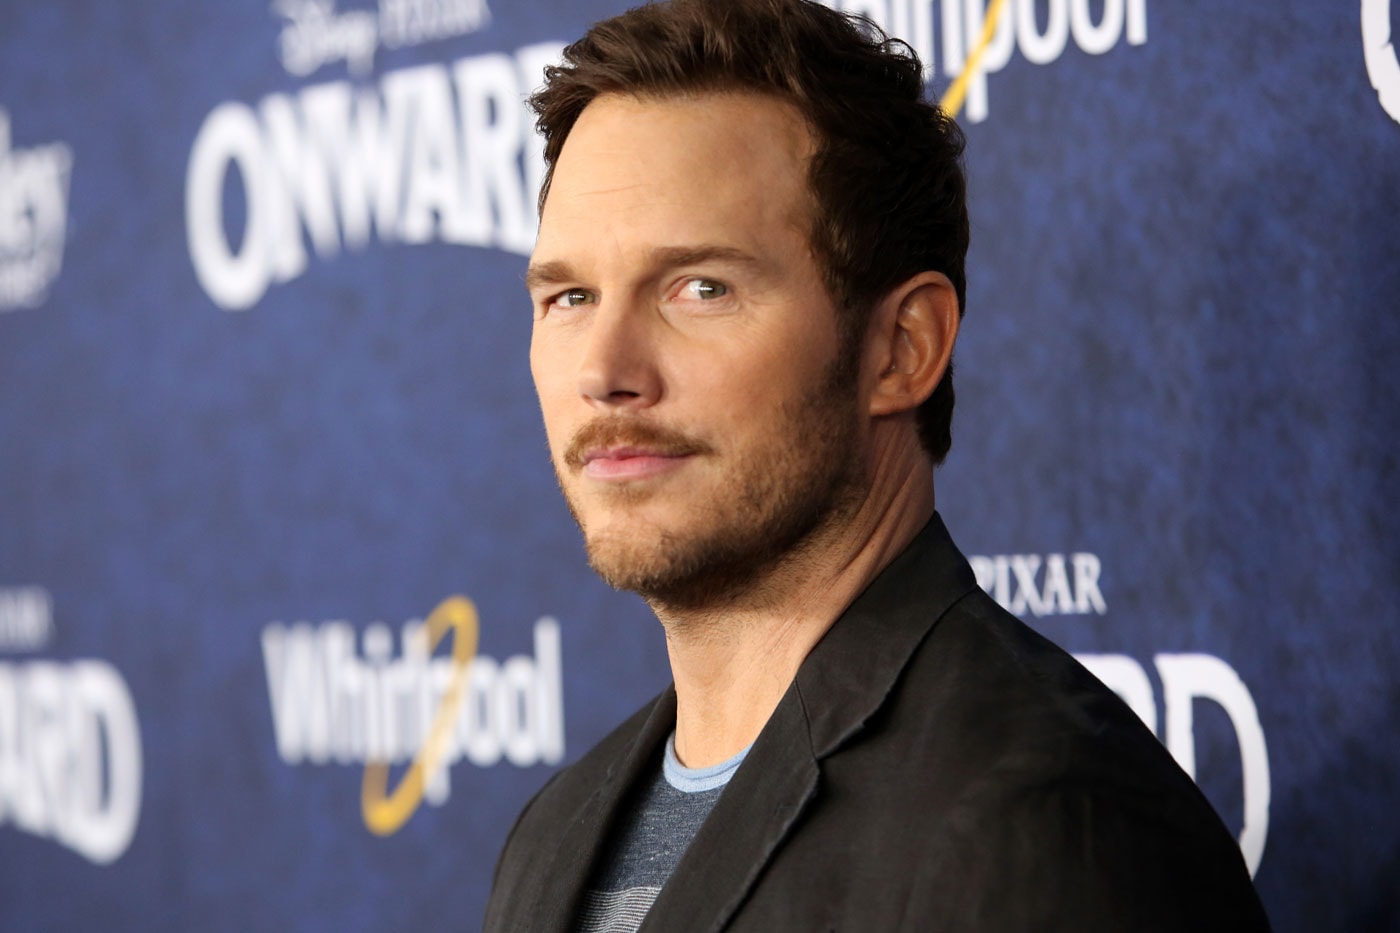 Chris Pratt Reveals New Character for 'Jurassic World: Dominion' in Latest First Look Image dewanda wise she's gotta have it jurassic park sequel jessica chastain colin trevorrow instagram